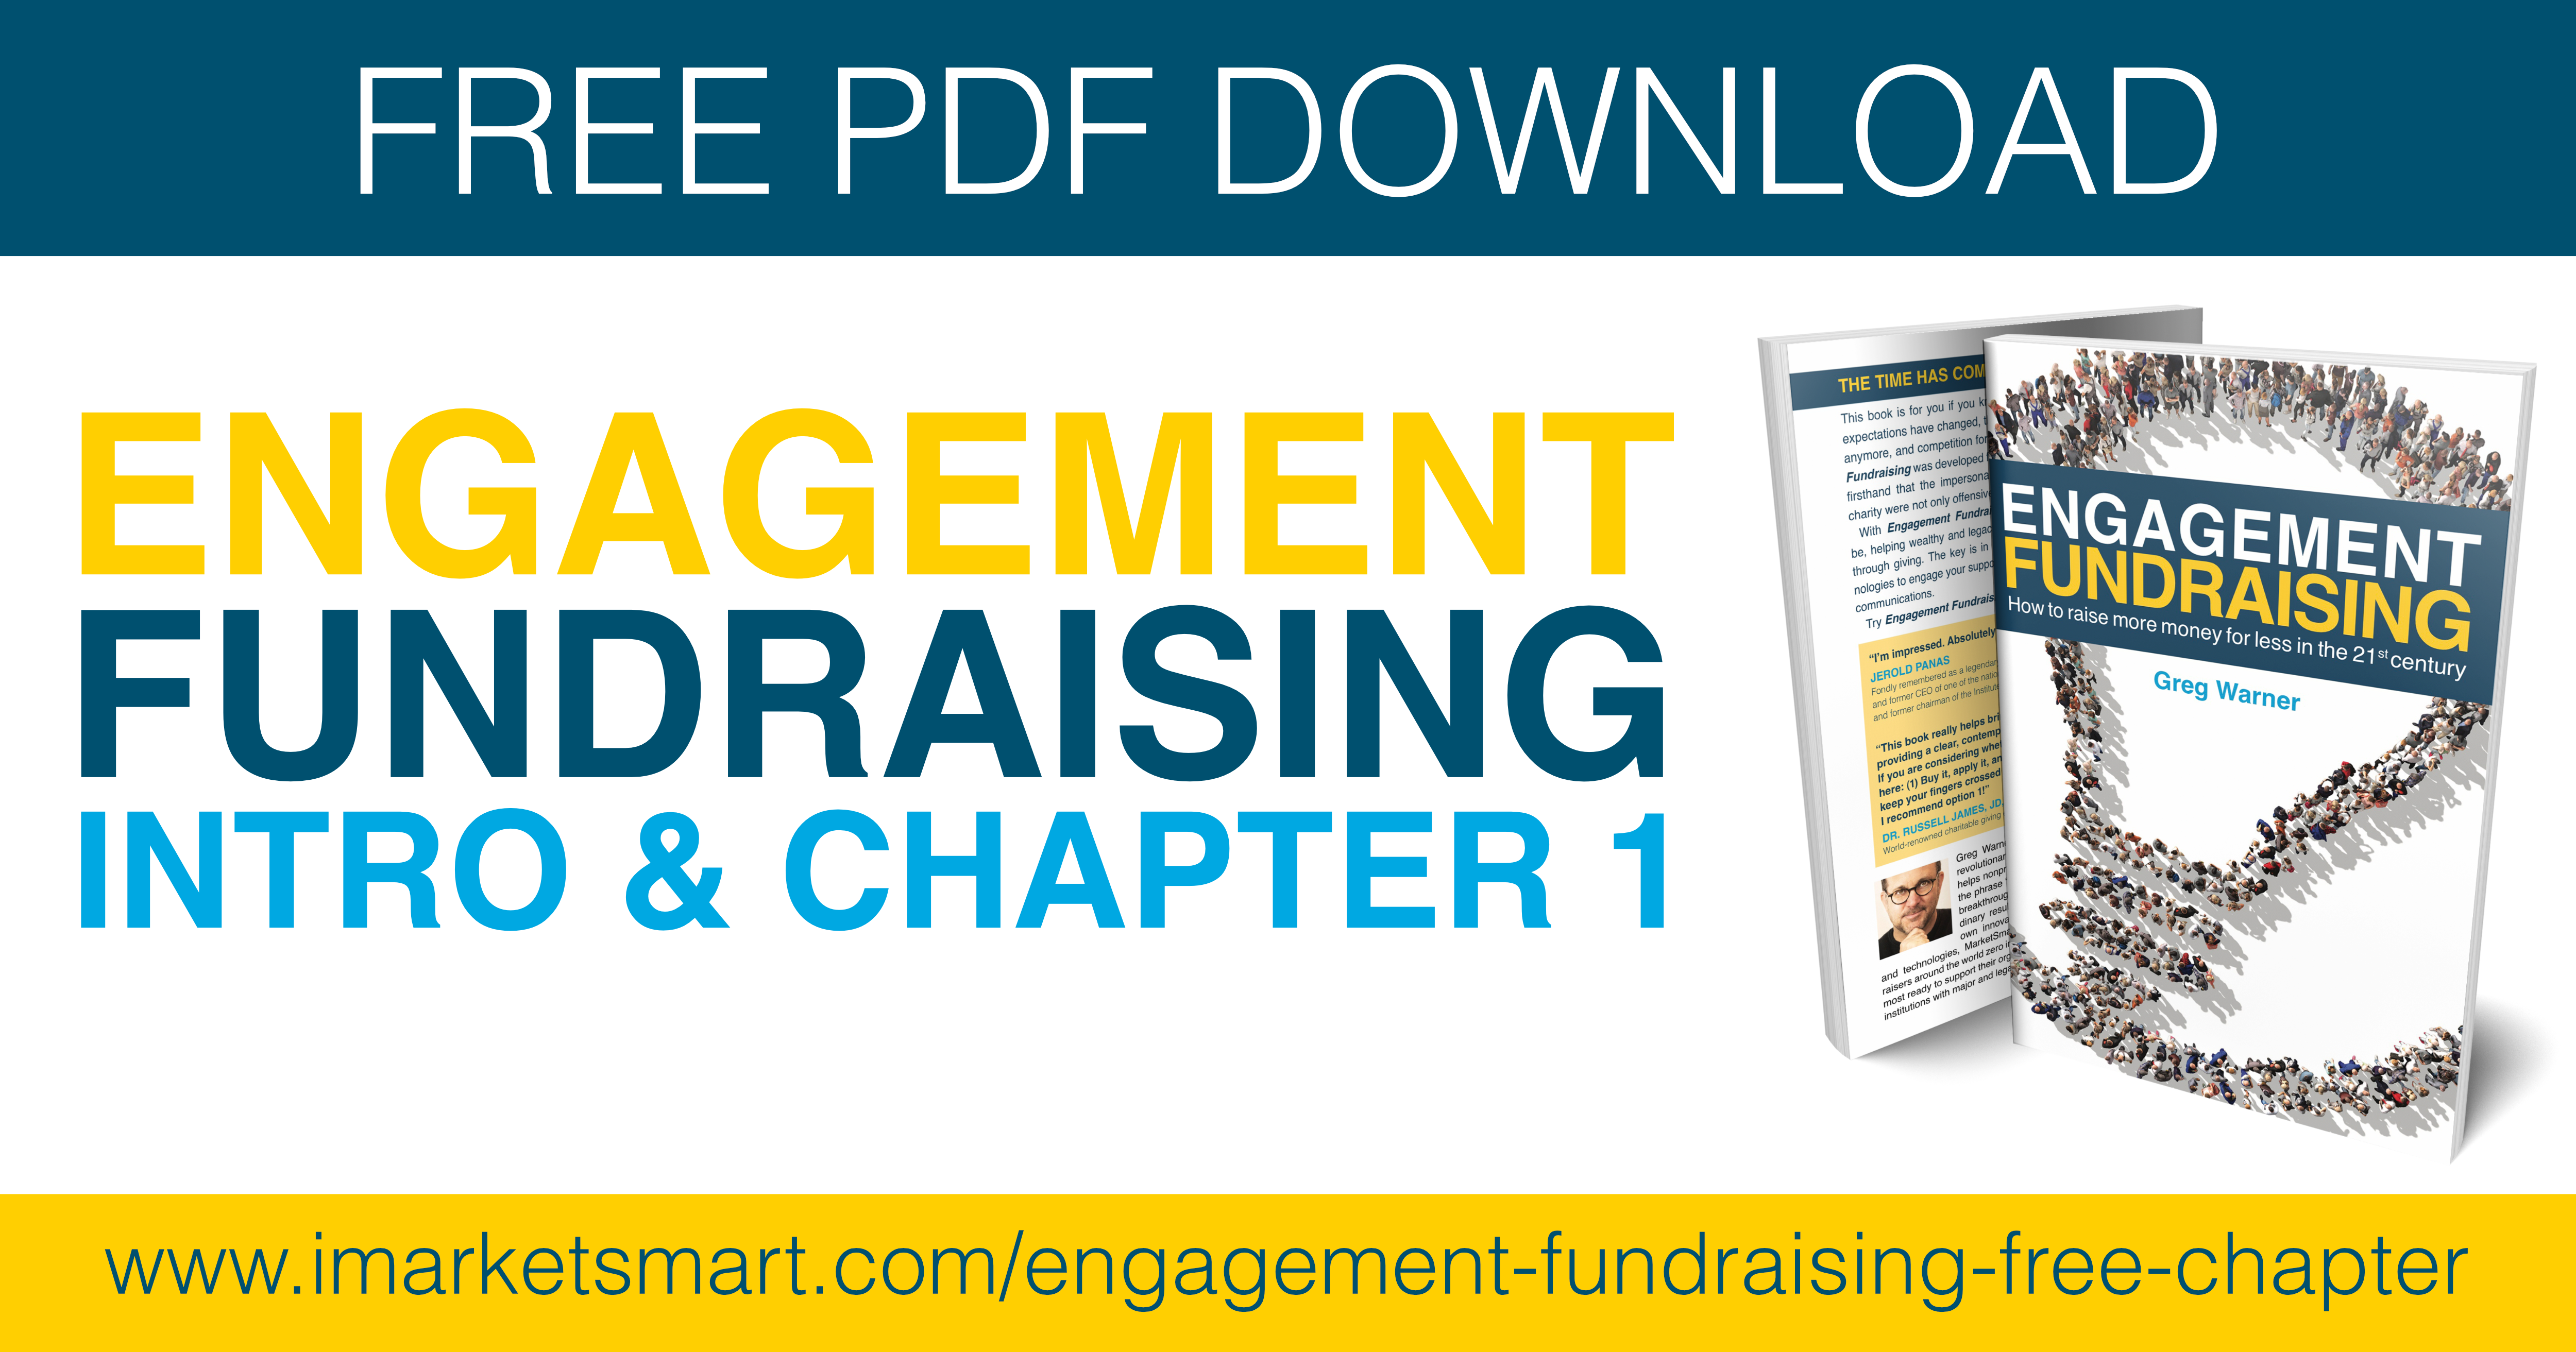 Free introduction and chapter 1 download of Engagement Fundraising